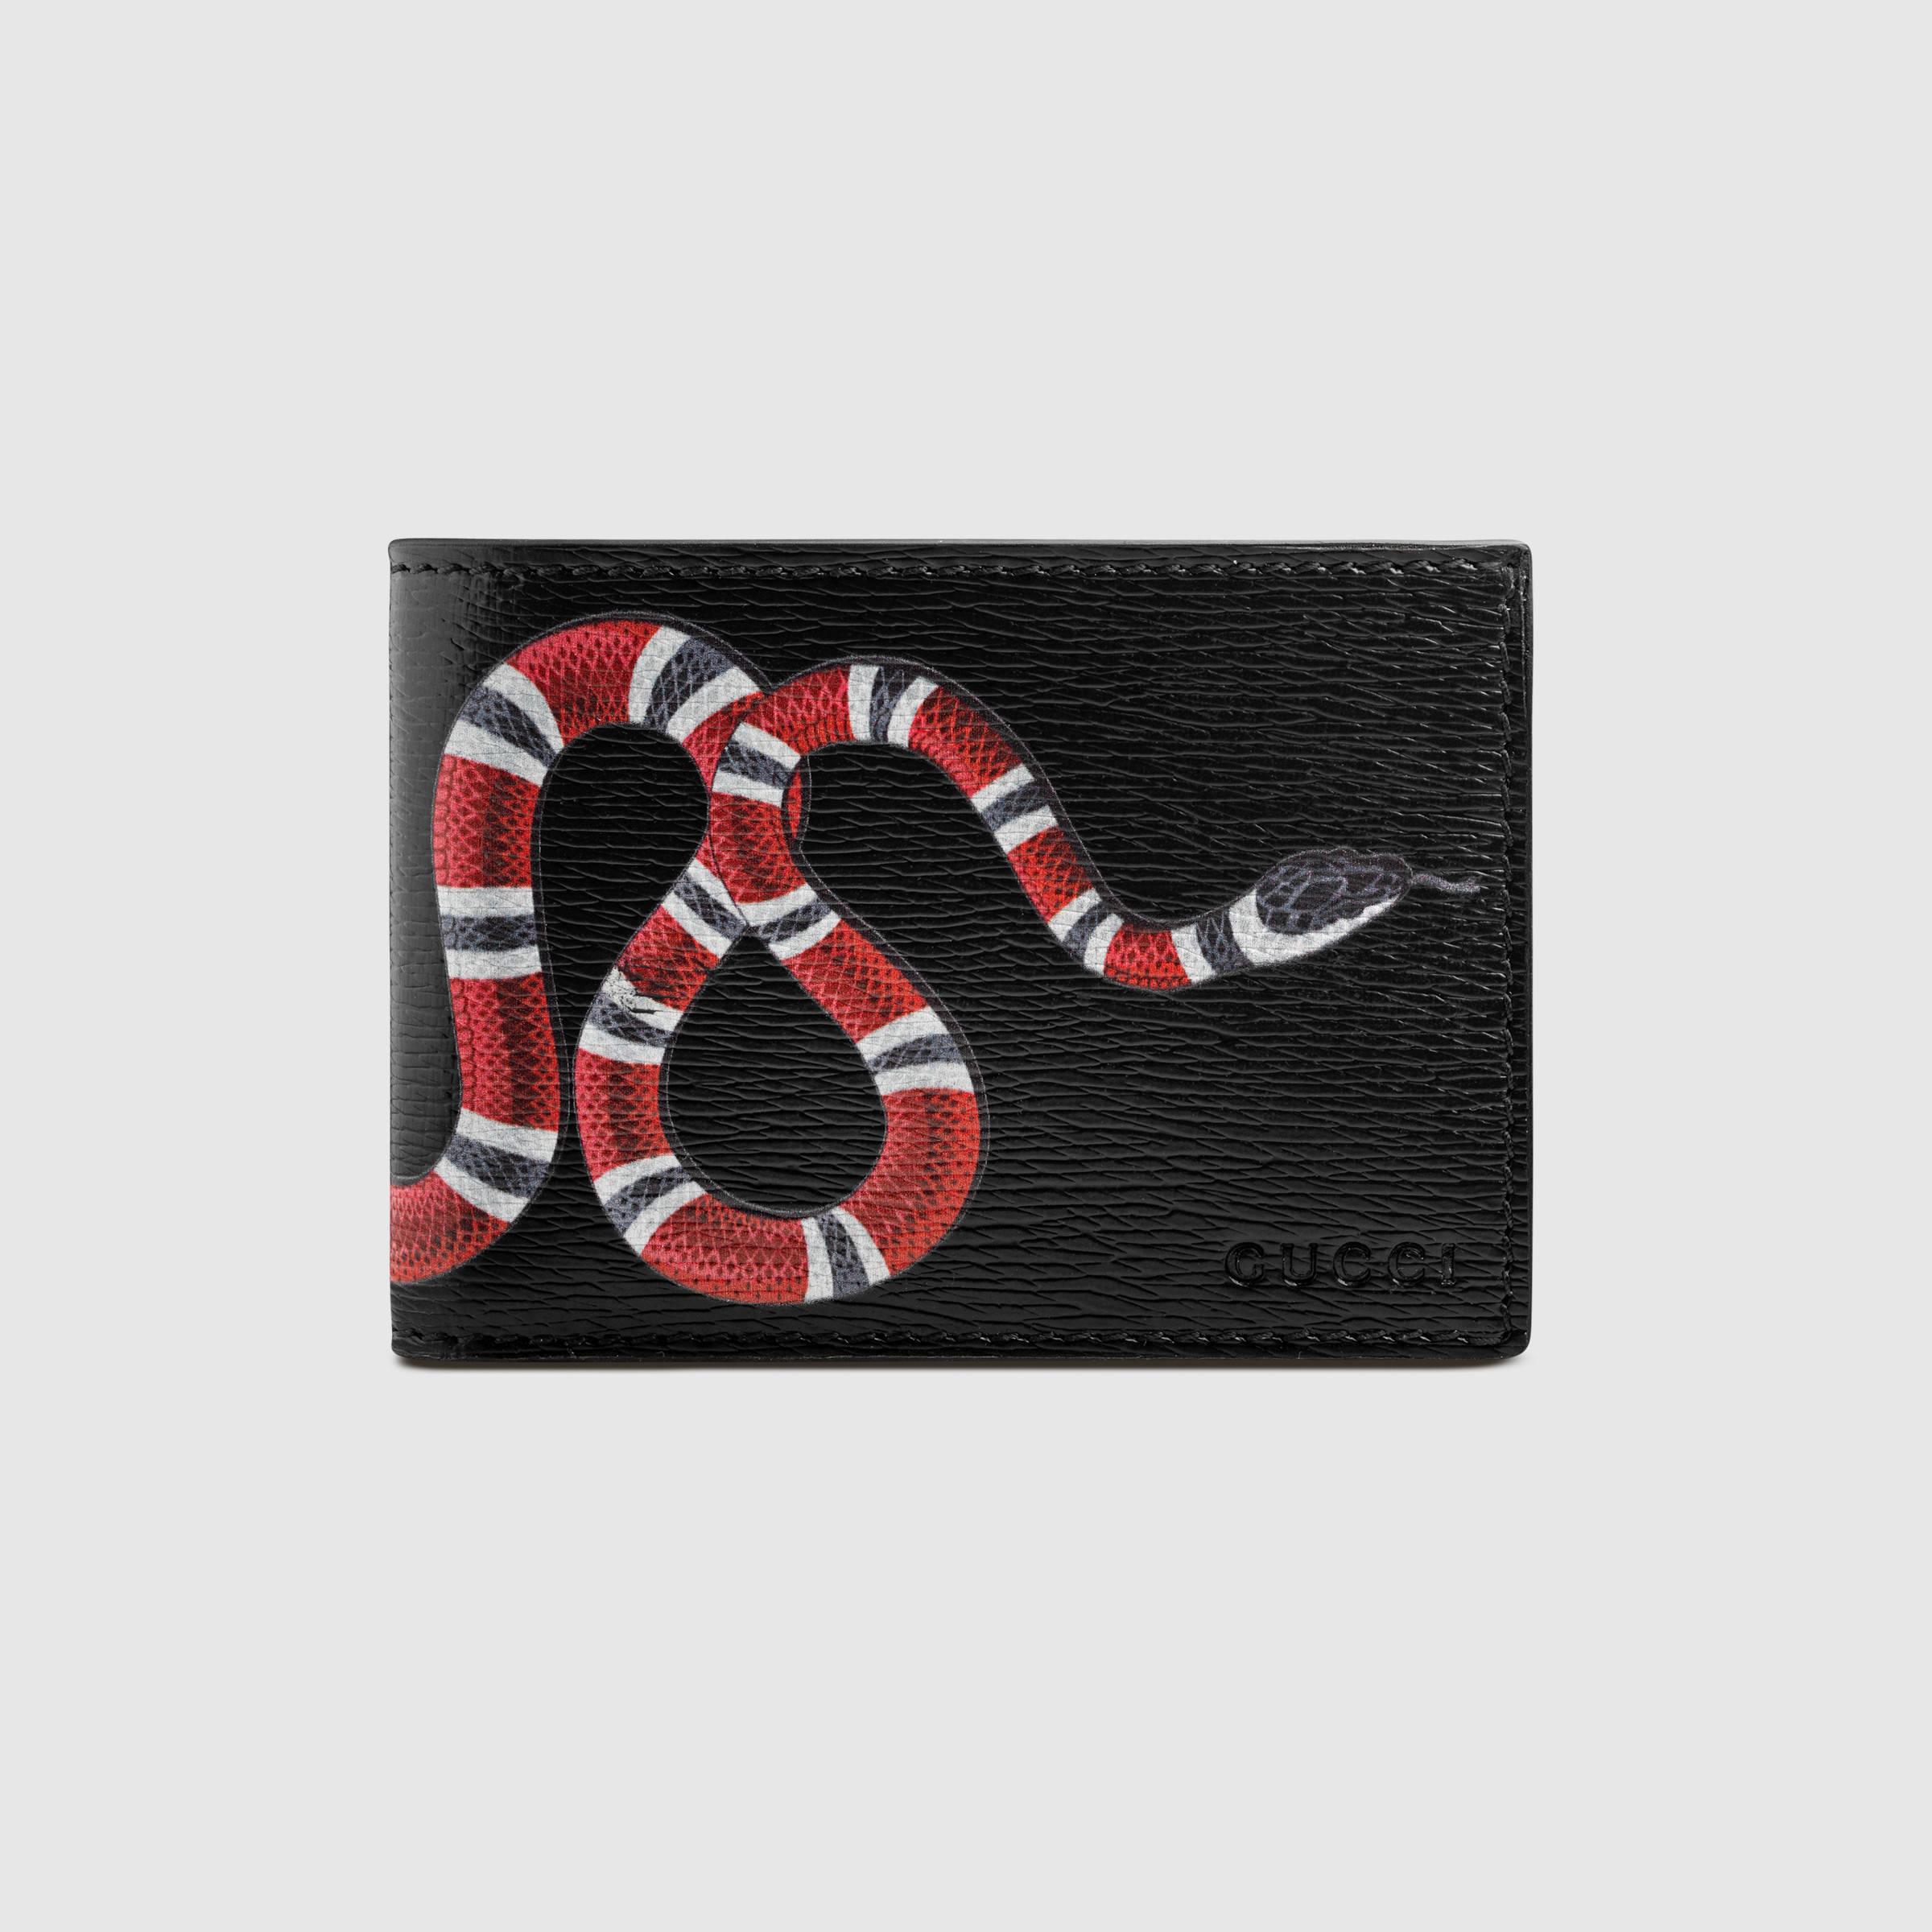  Gucci  Snake  Print Leather Wallet  in Black for Men Lyst